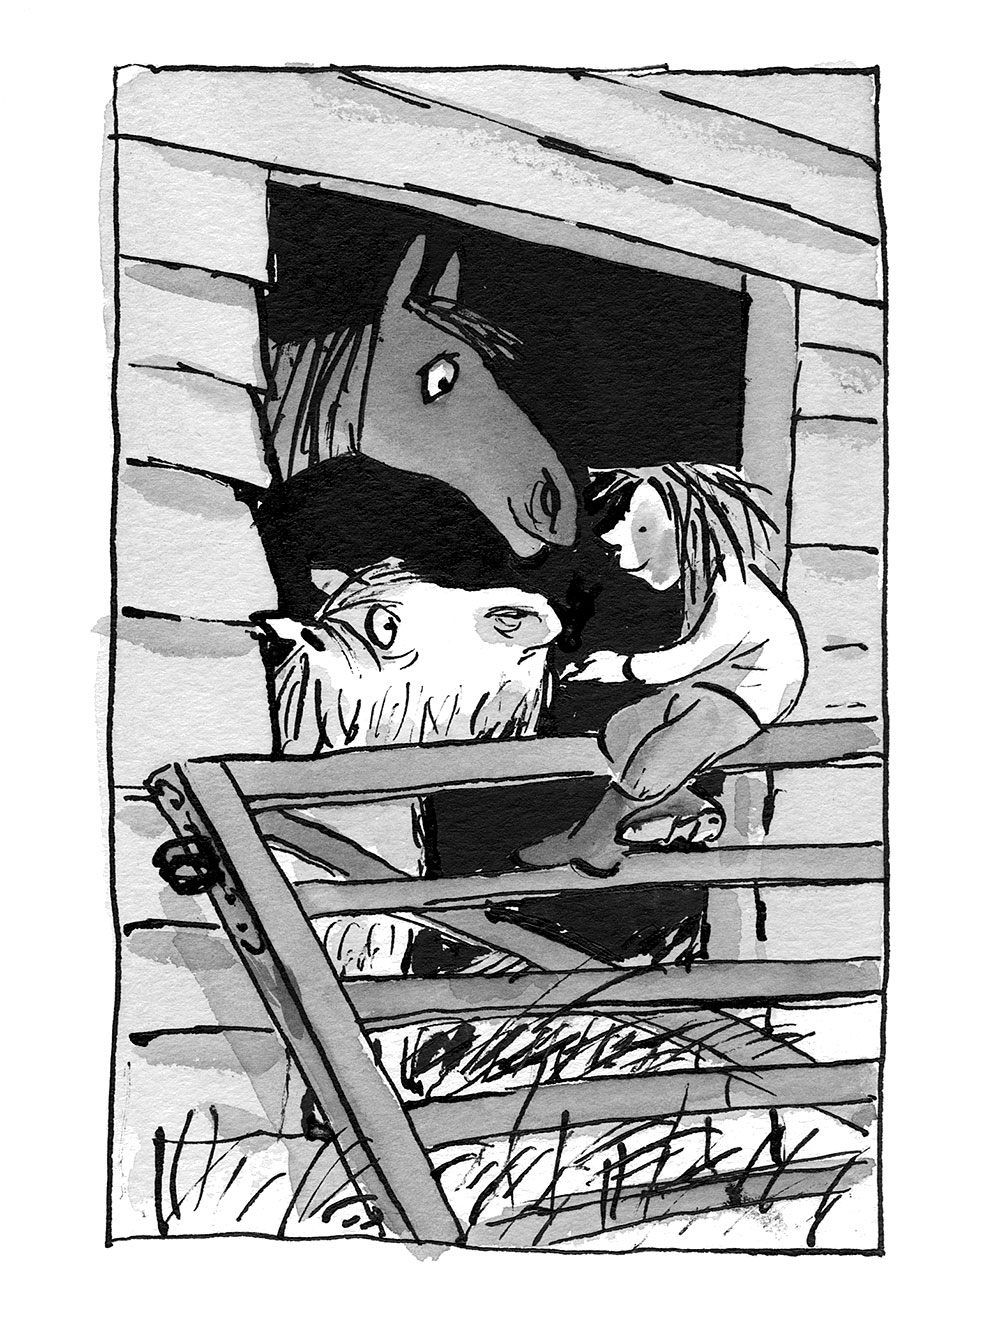 An illustration from The Horse Who Wouldn't Gallop by Clare Balding showing Charlie Bass in the stables with the horses